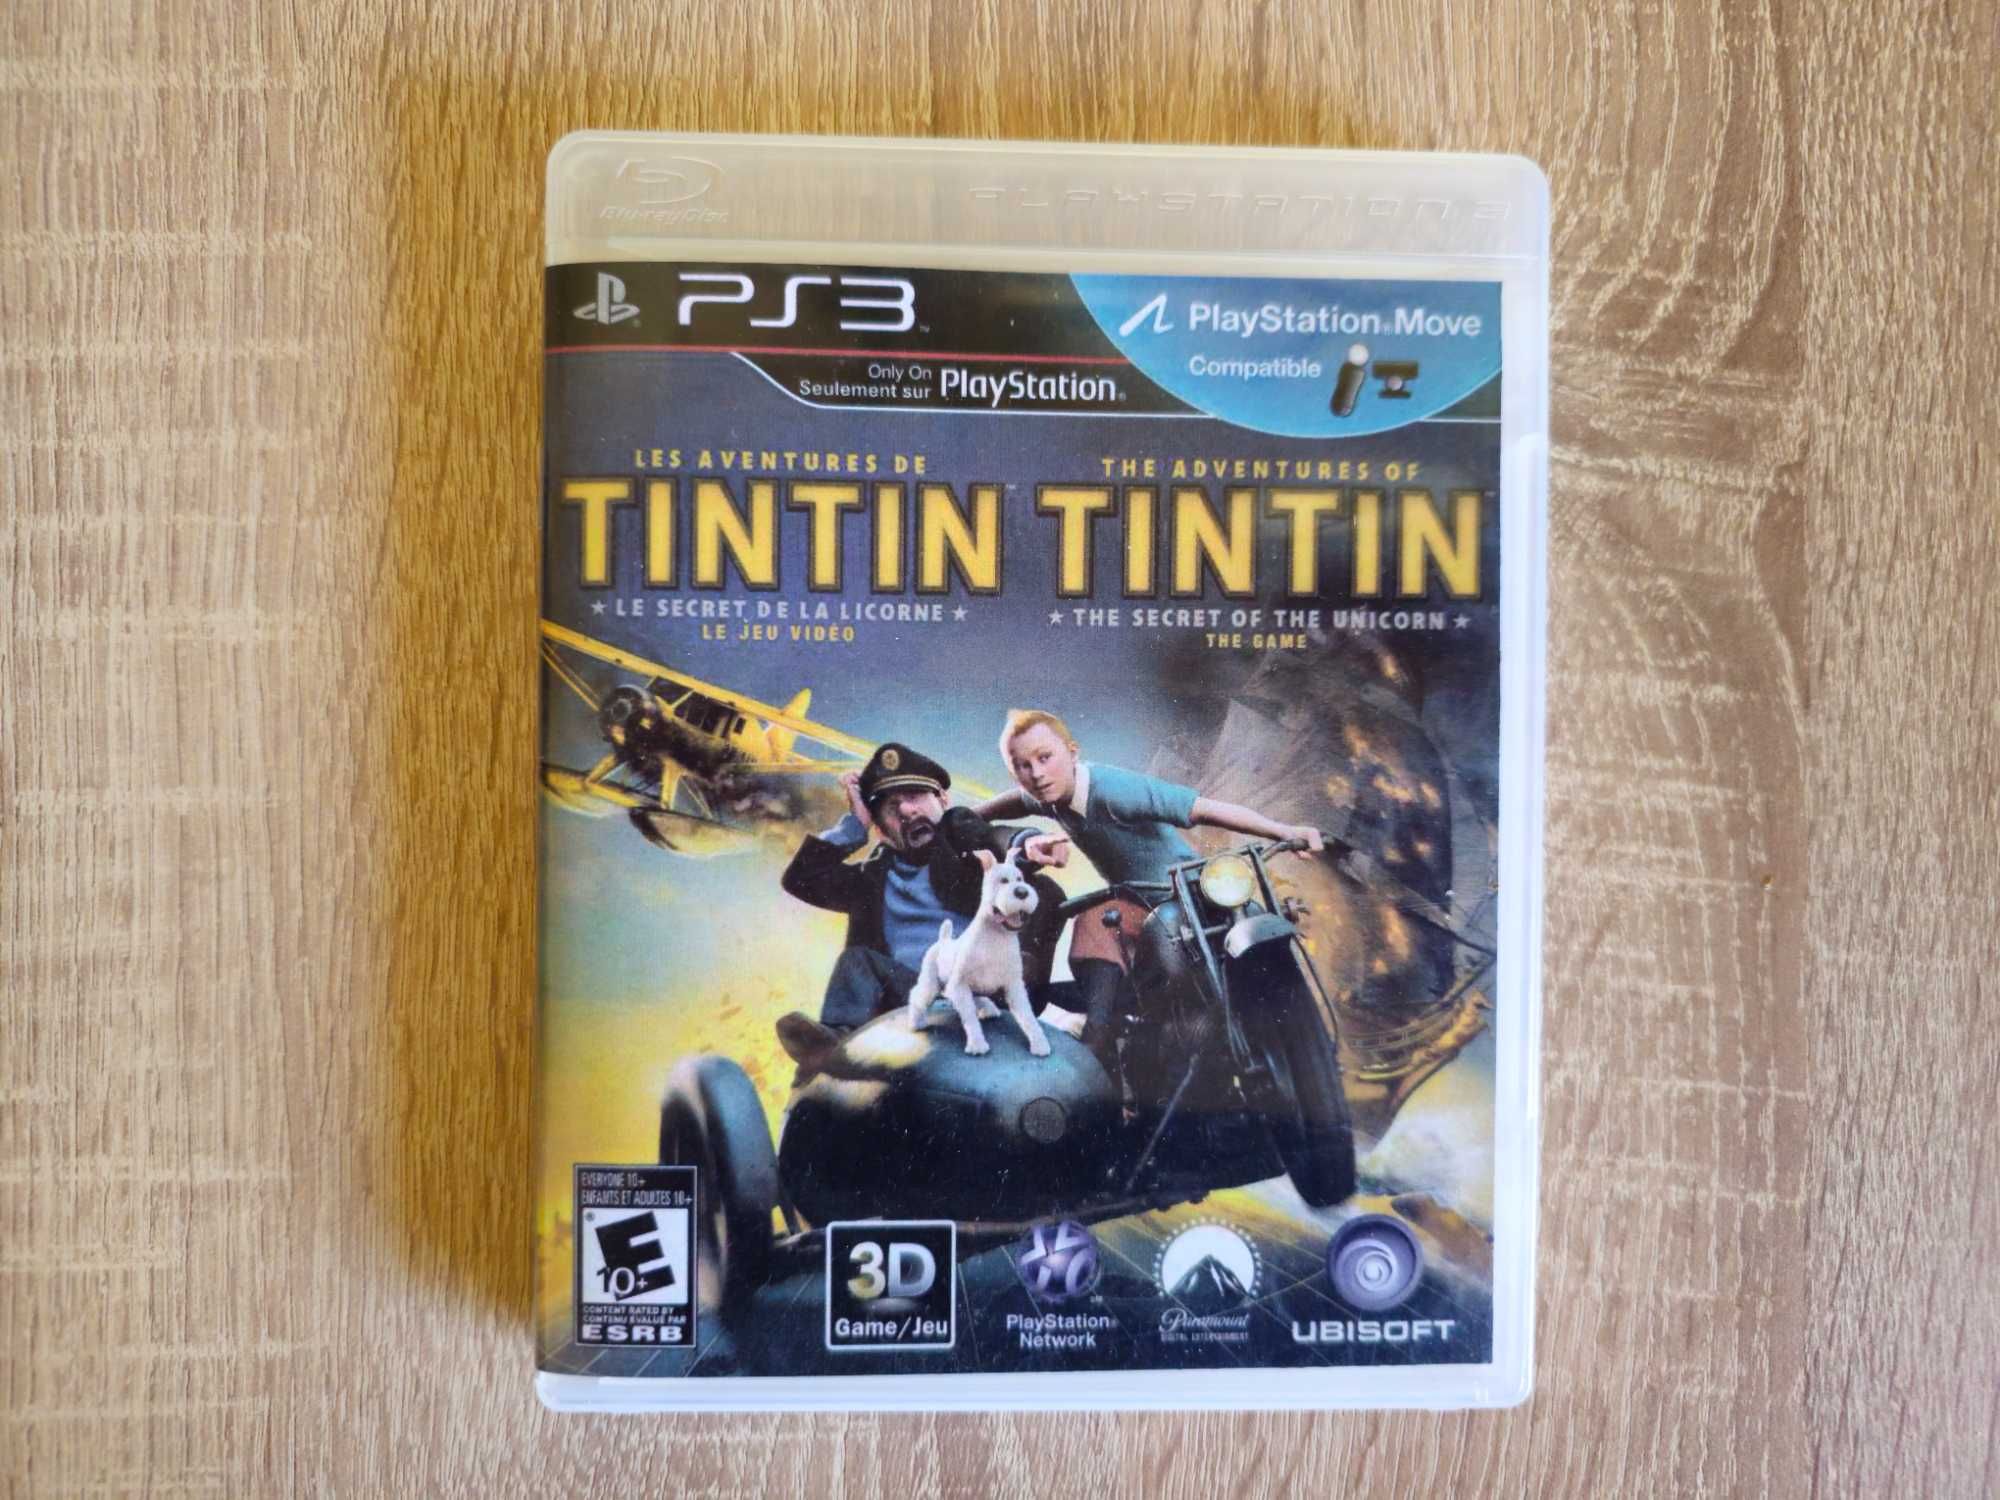 The Adventures of Tintin за PlayStation 3 PS3 ПС3